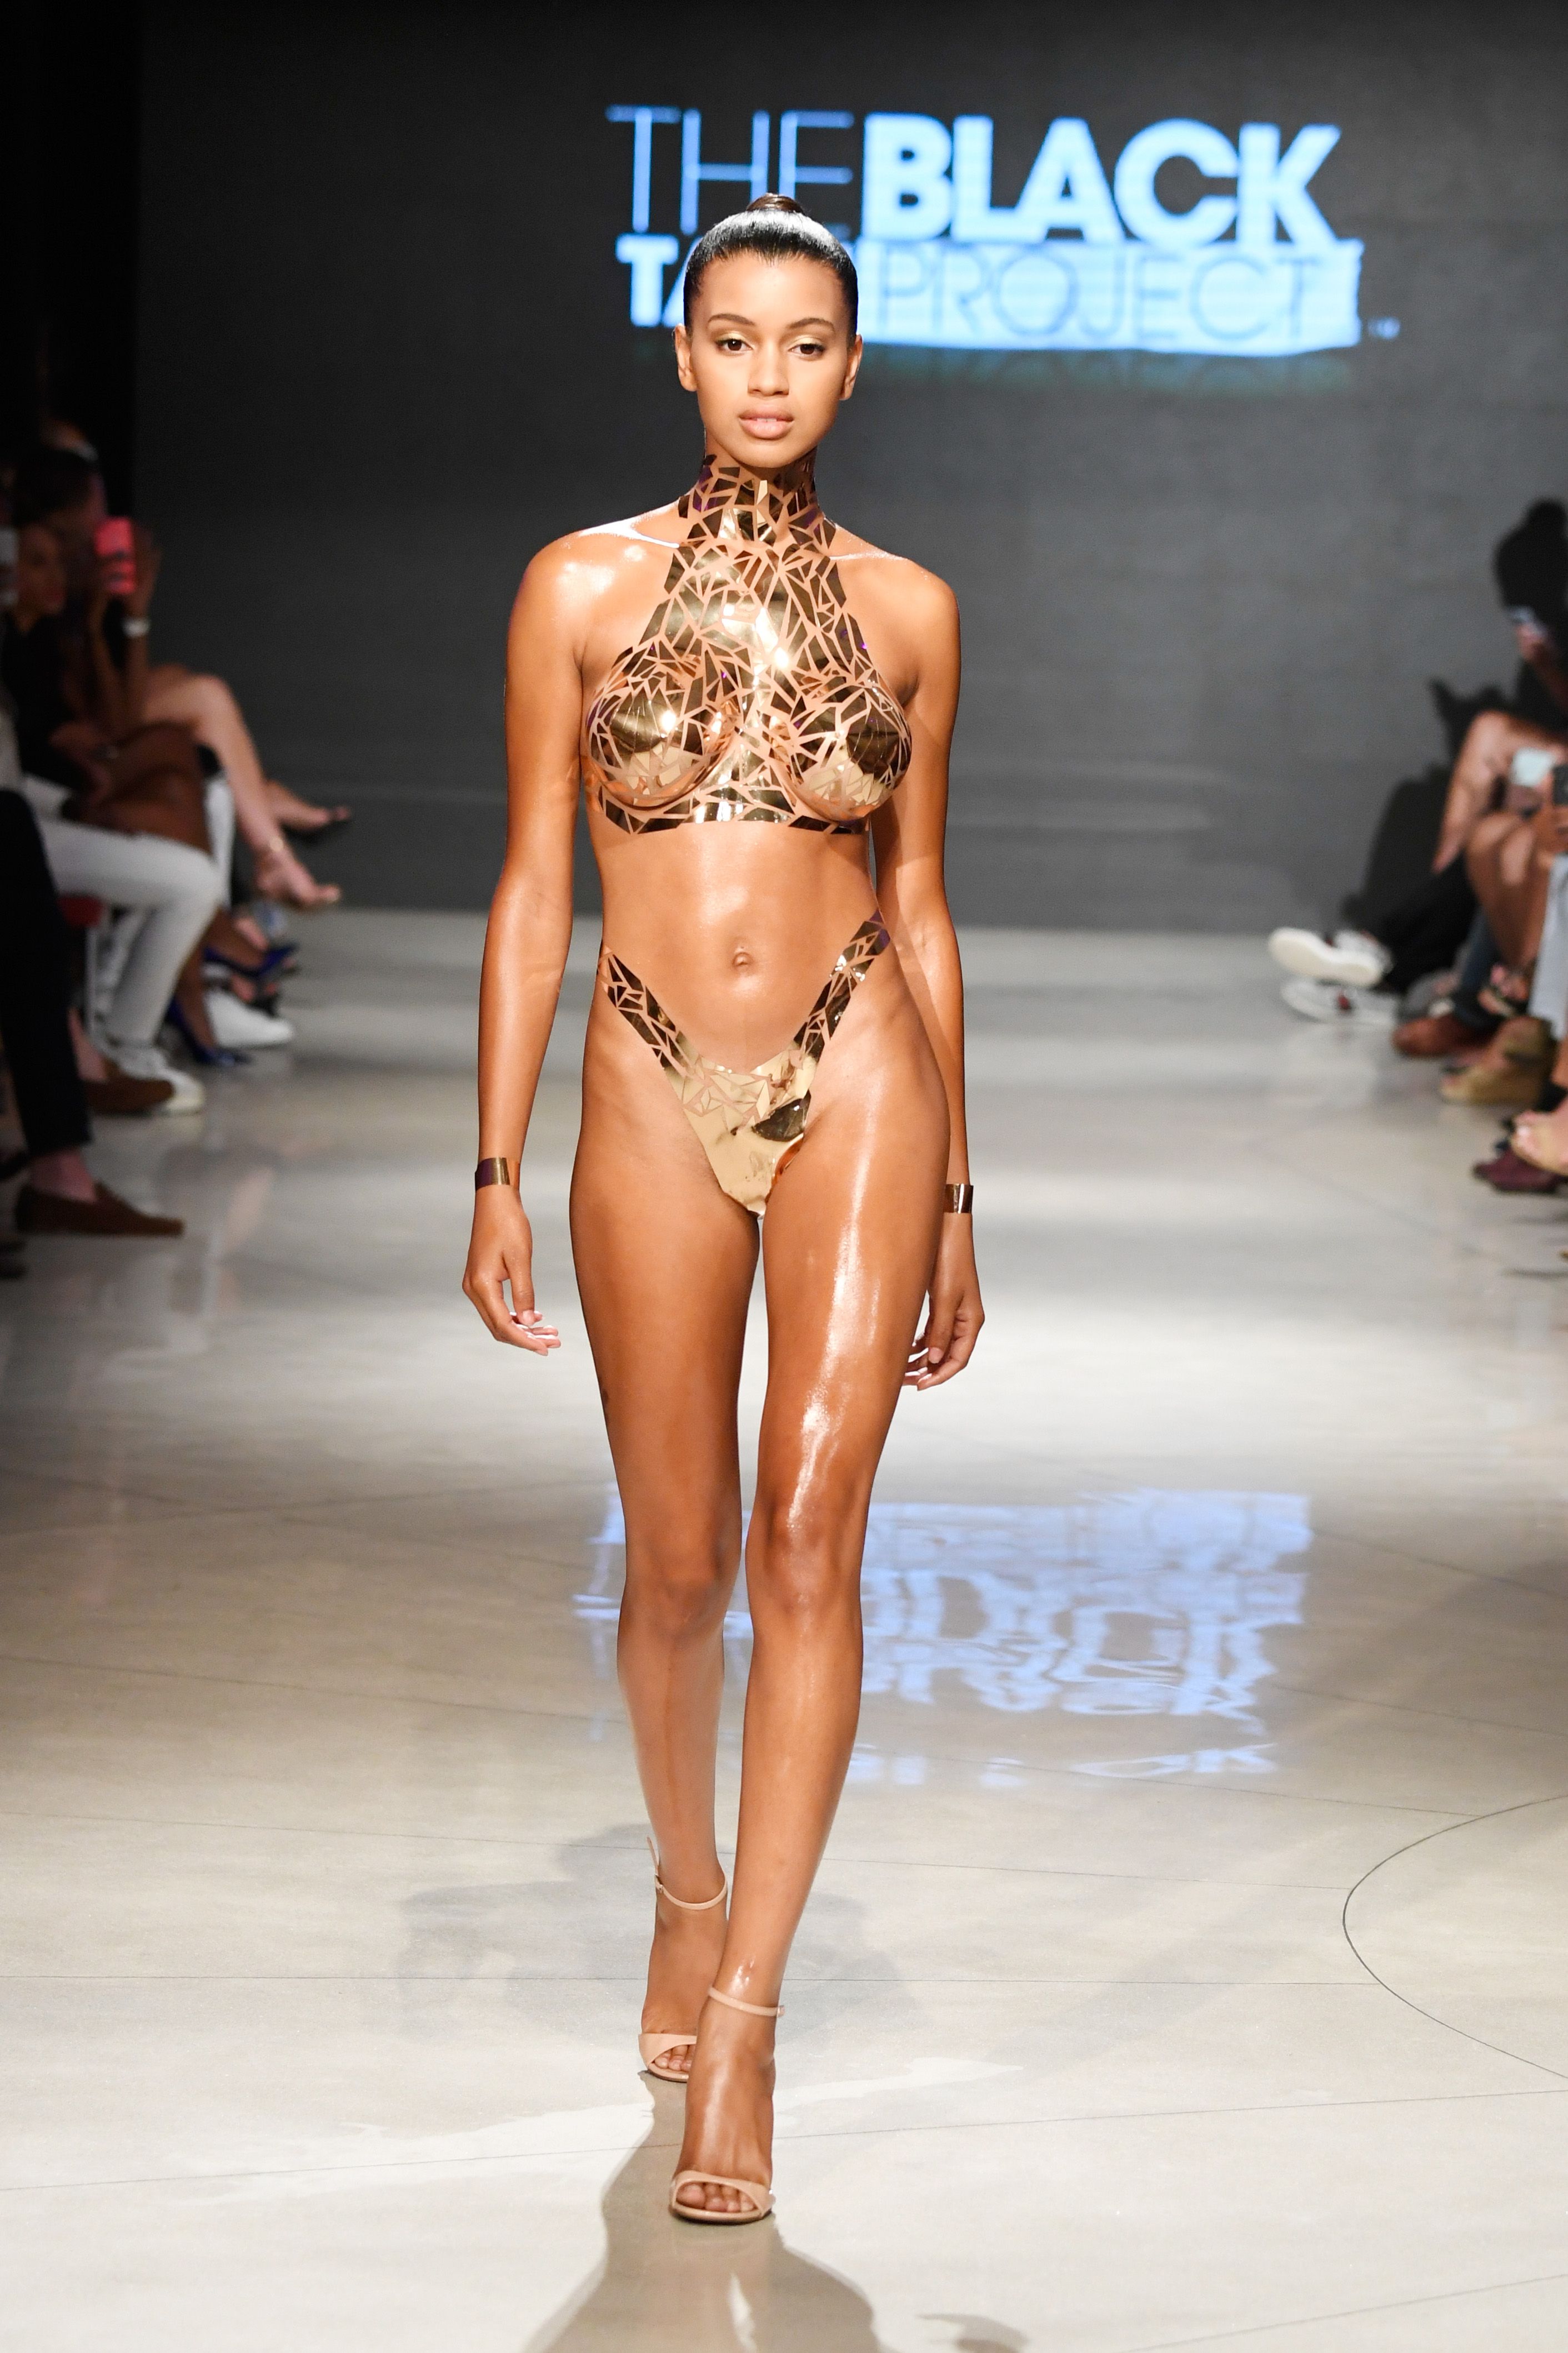 Black Fashion Nude - Nearly Naked Metallic Tape Swimsuits Exist - All About the Black Tape  Project Maimi Swim Week Show